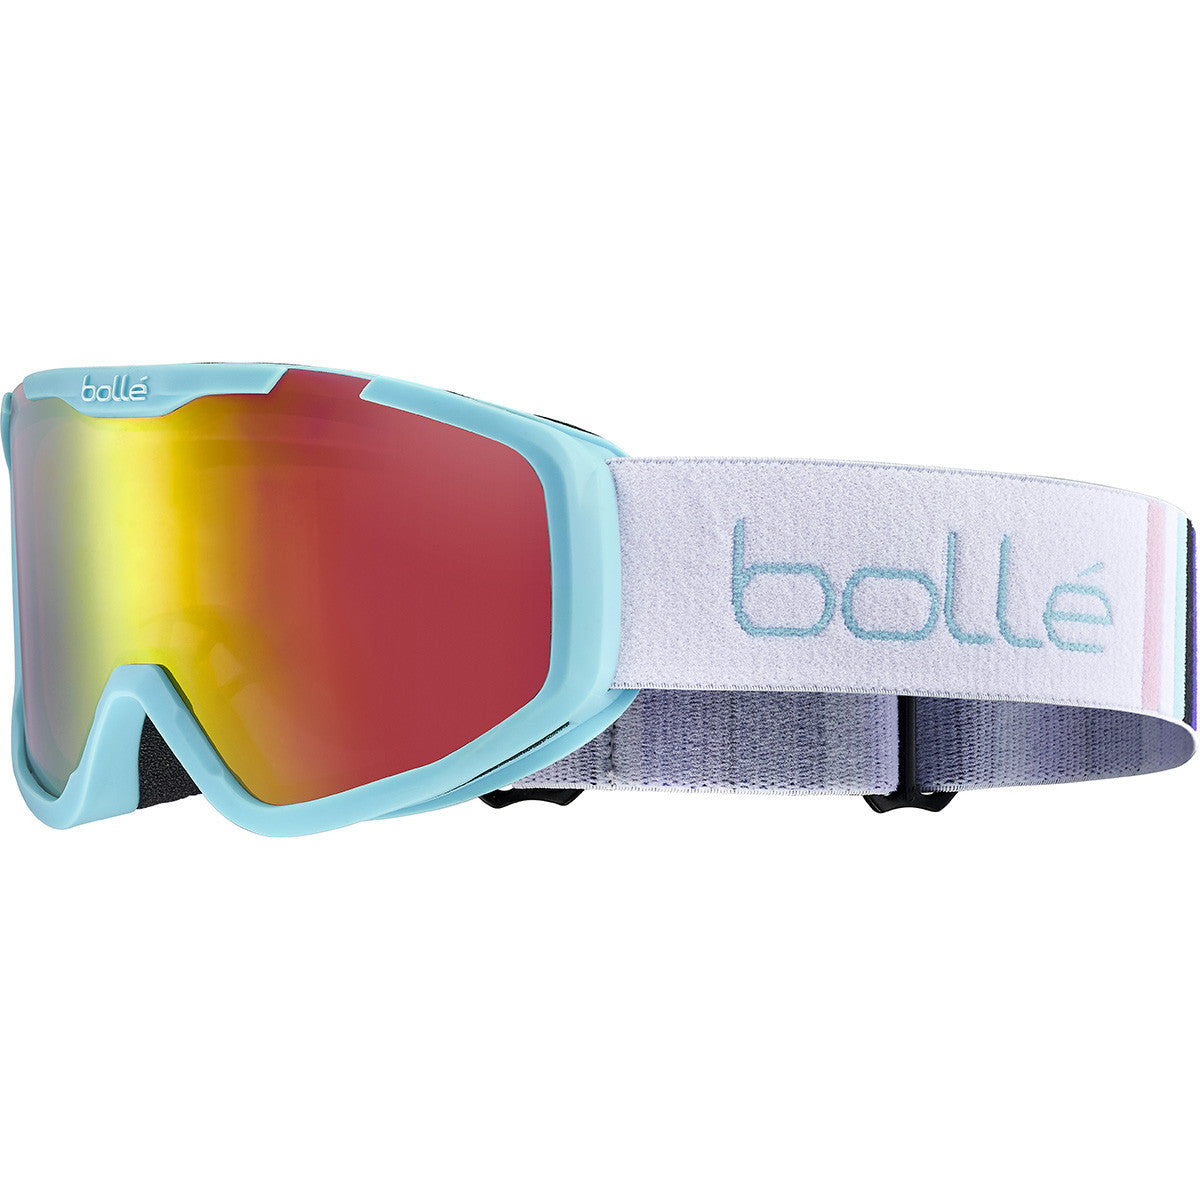 Bolle Rocket Plus Goggles  Blue Matte Small One size